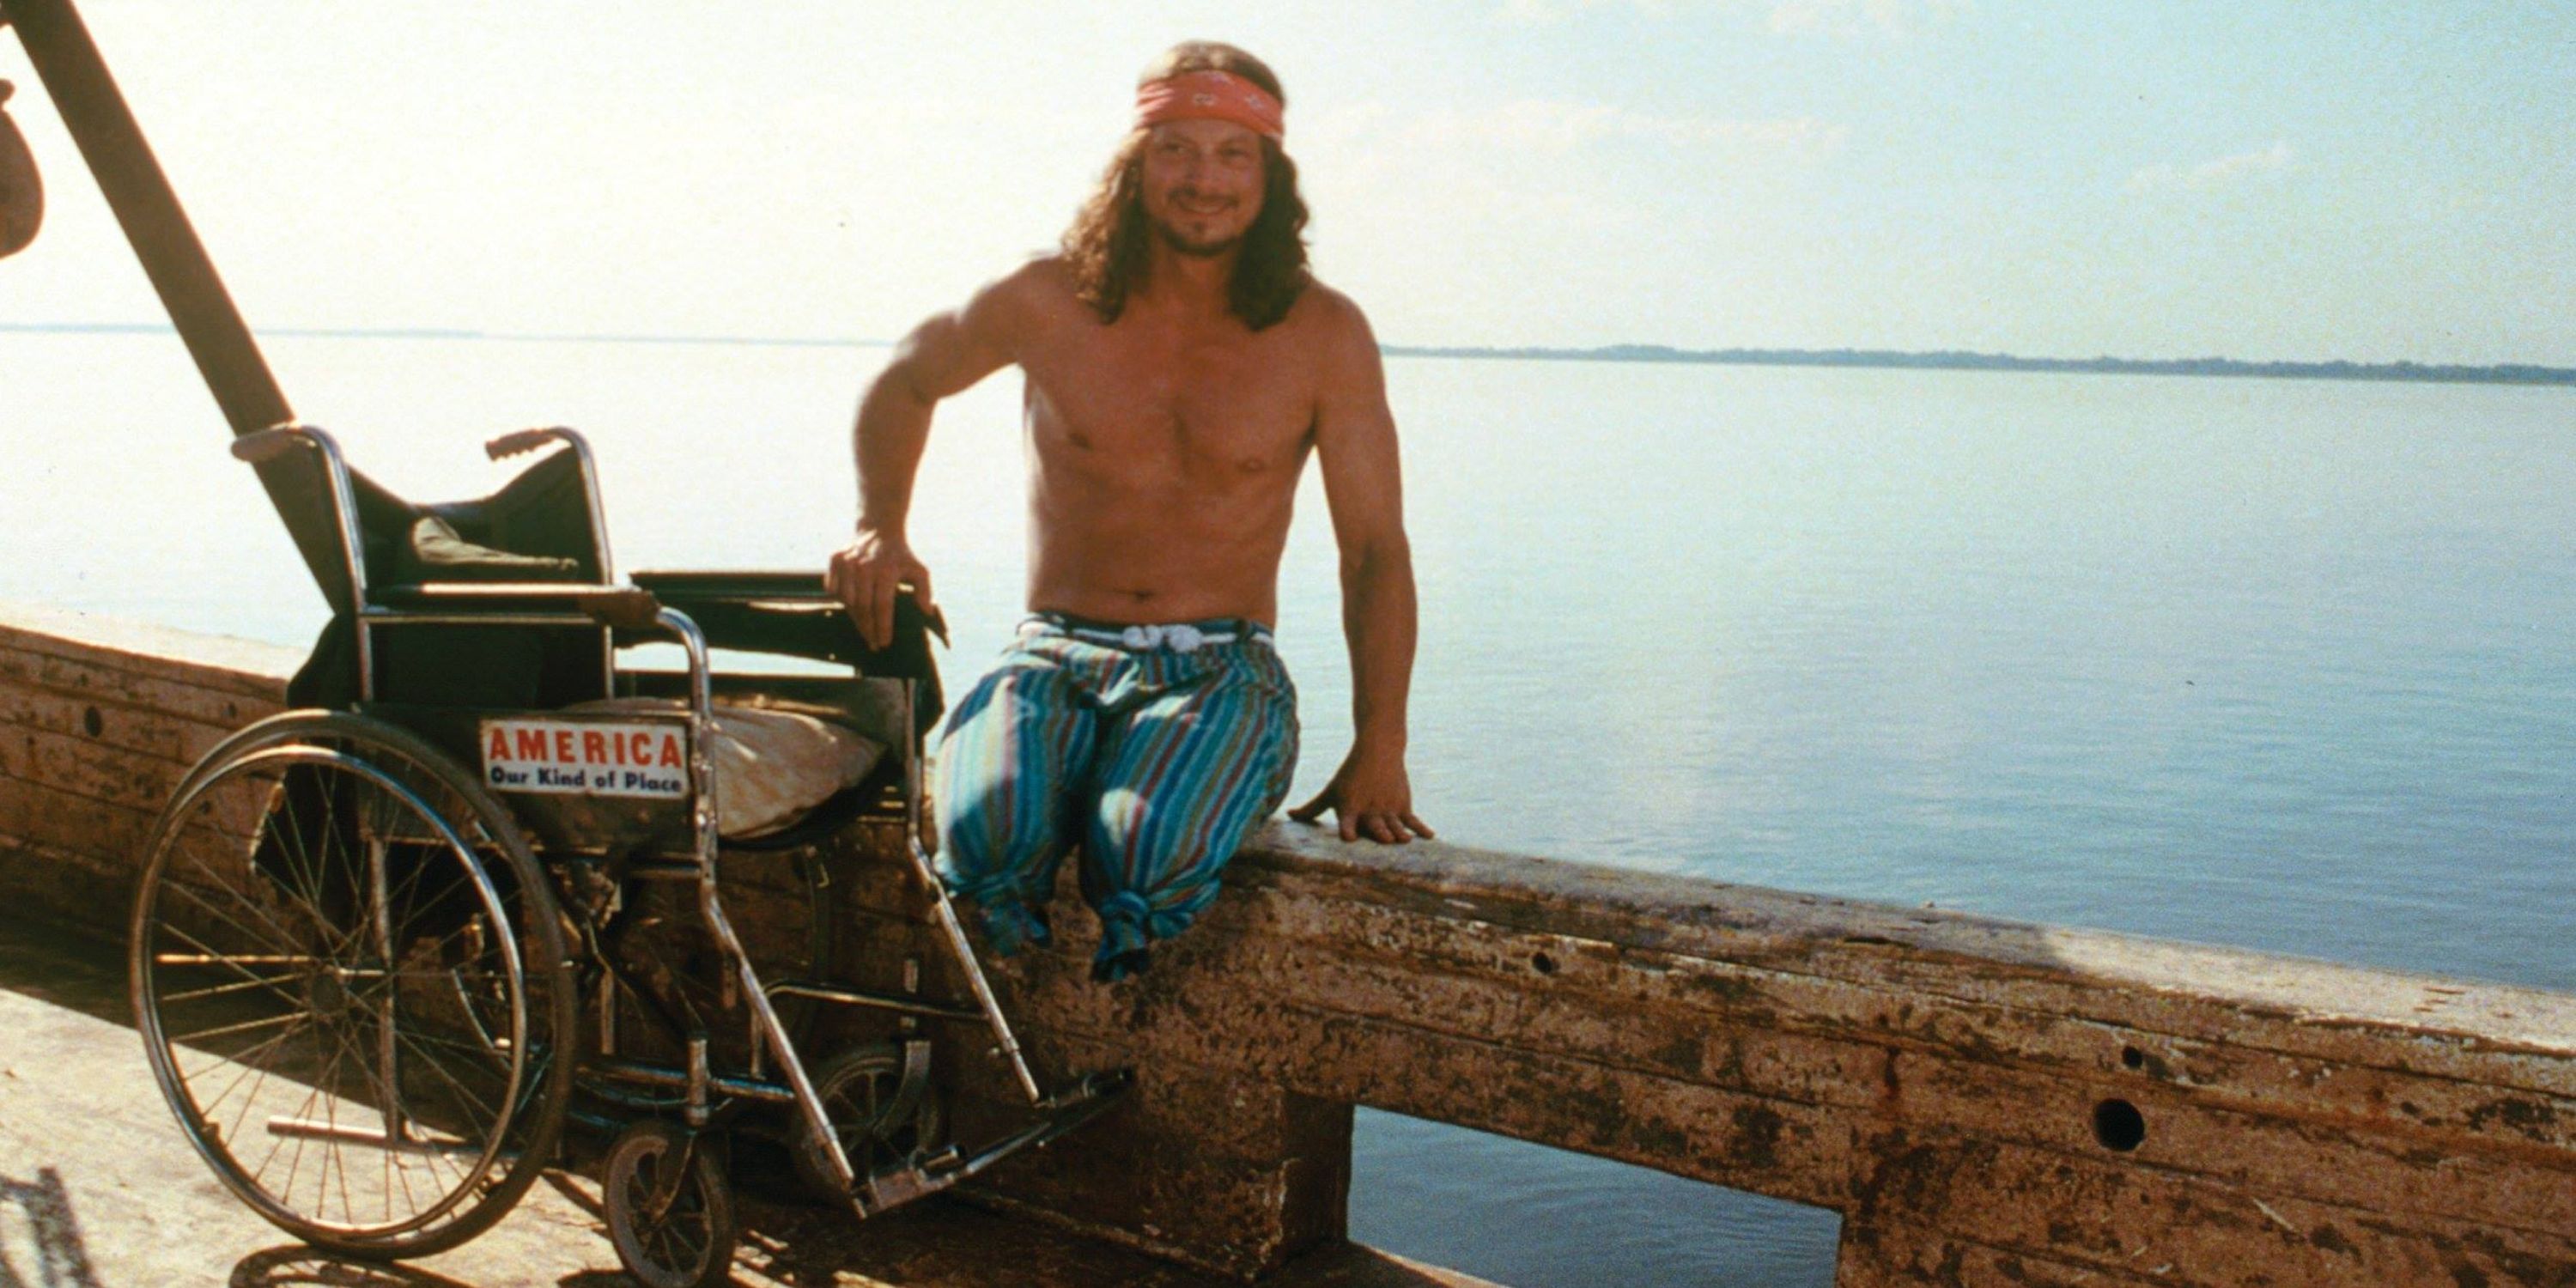 First Mate Lieutenant Dan on the boat out of his wheelchair in Forrest Gump